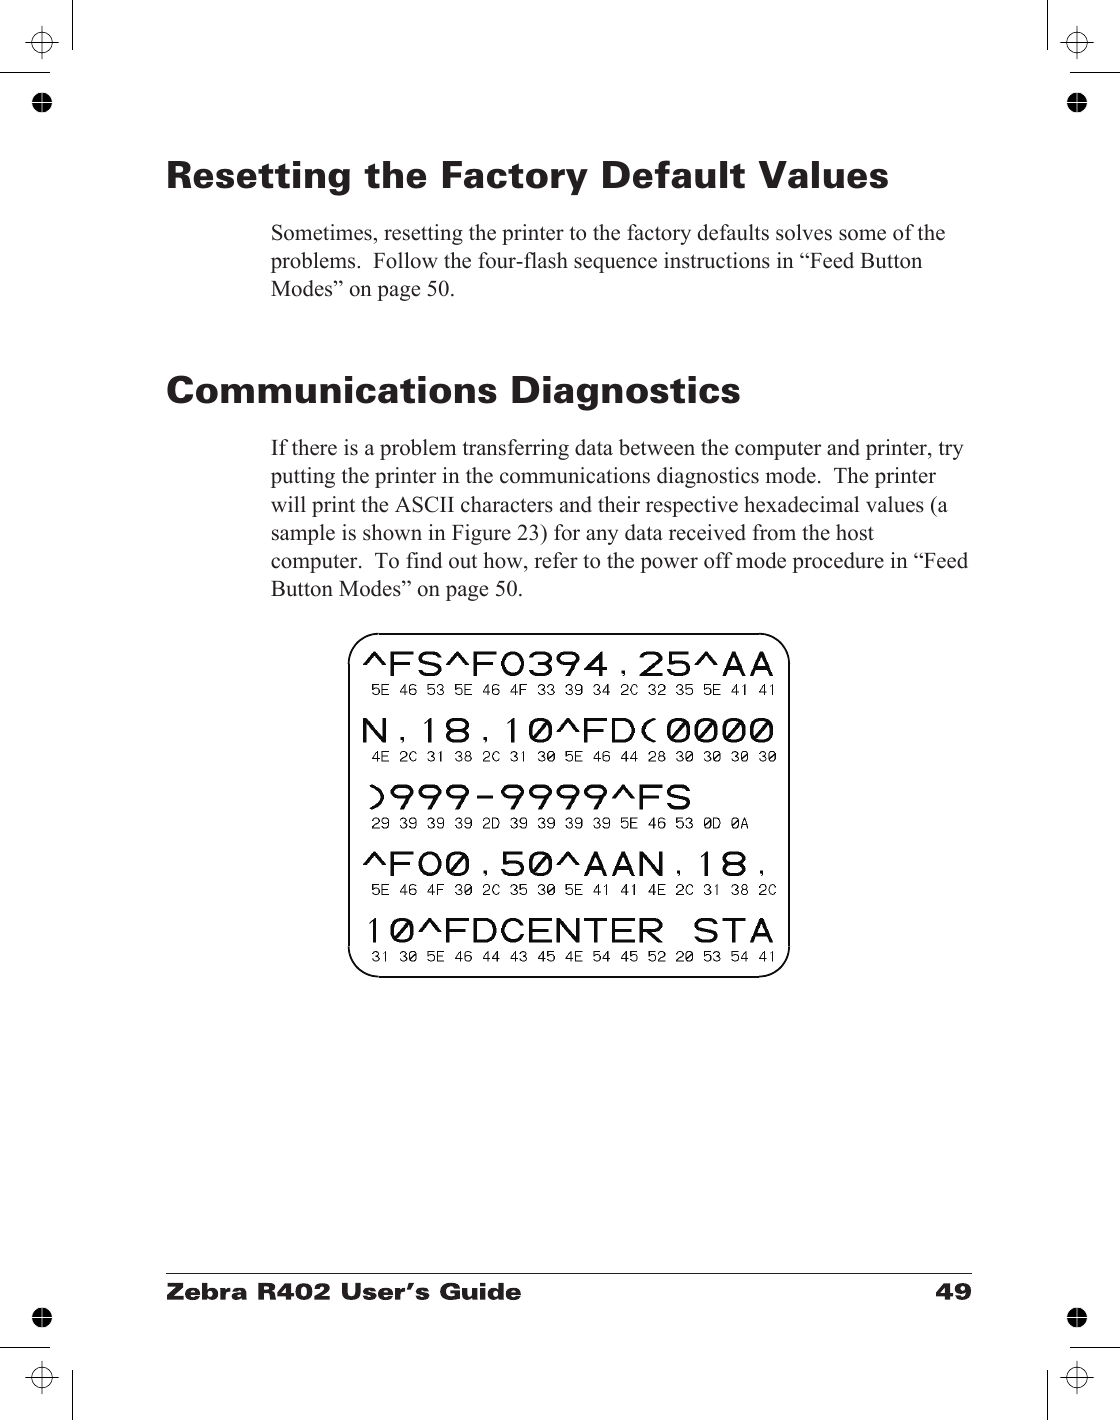 Resetting the Factory Default ValuesSometimes, resetting the printer to the factory defaults solves some of theproblems.  Follow the four-flash sequence instructions in “Feed ButtonModes” on page 50.Communications DiagnosticsIf there is a problem transferring data between the computer and printer, tryputting the printer in the communications diagnostics mode.  The printerwill print the ASCII characters and their respective hexadecimal values (asample is shown in Figure 23) for any data received from the hostcomputer.  To find out how, refer to the power off mode procedure in “FeedButton Modes” on page 50.